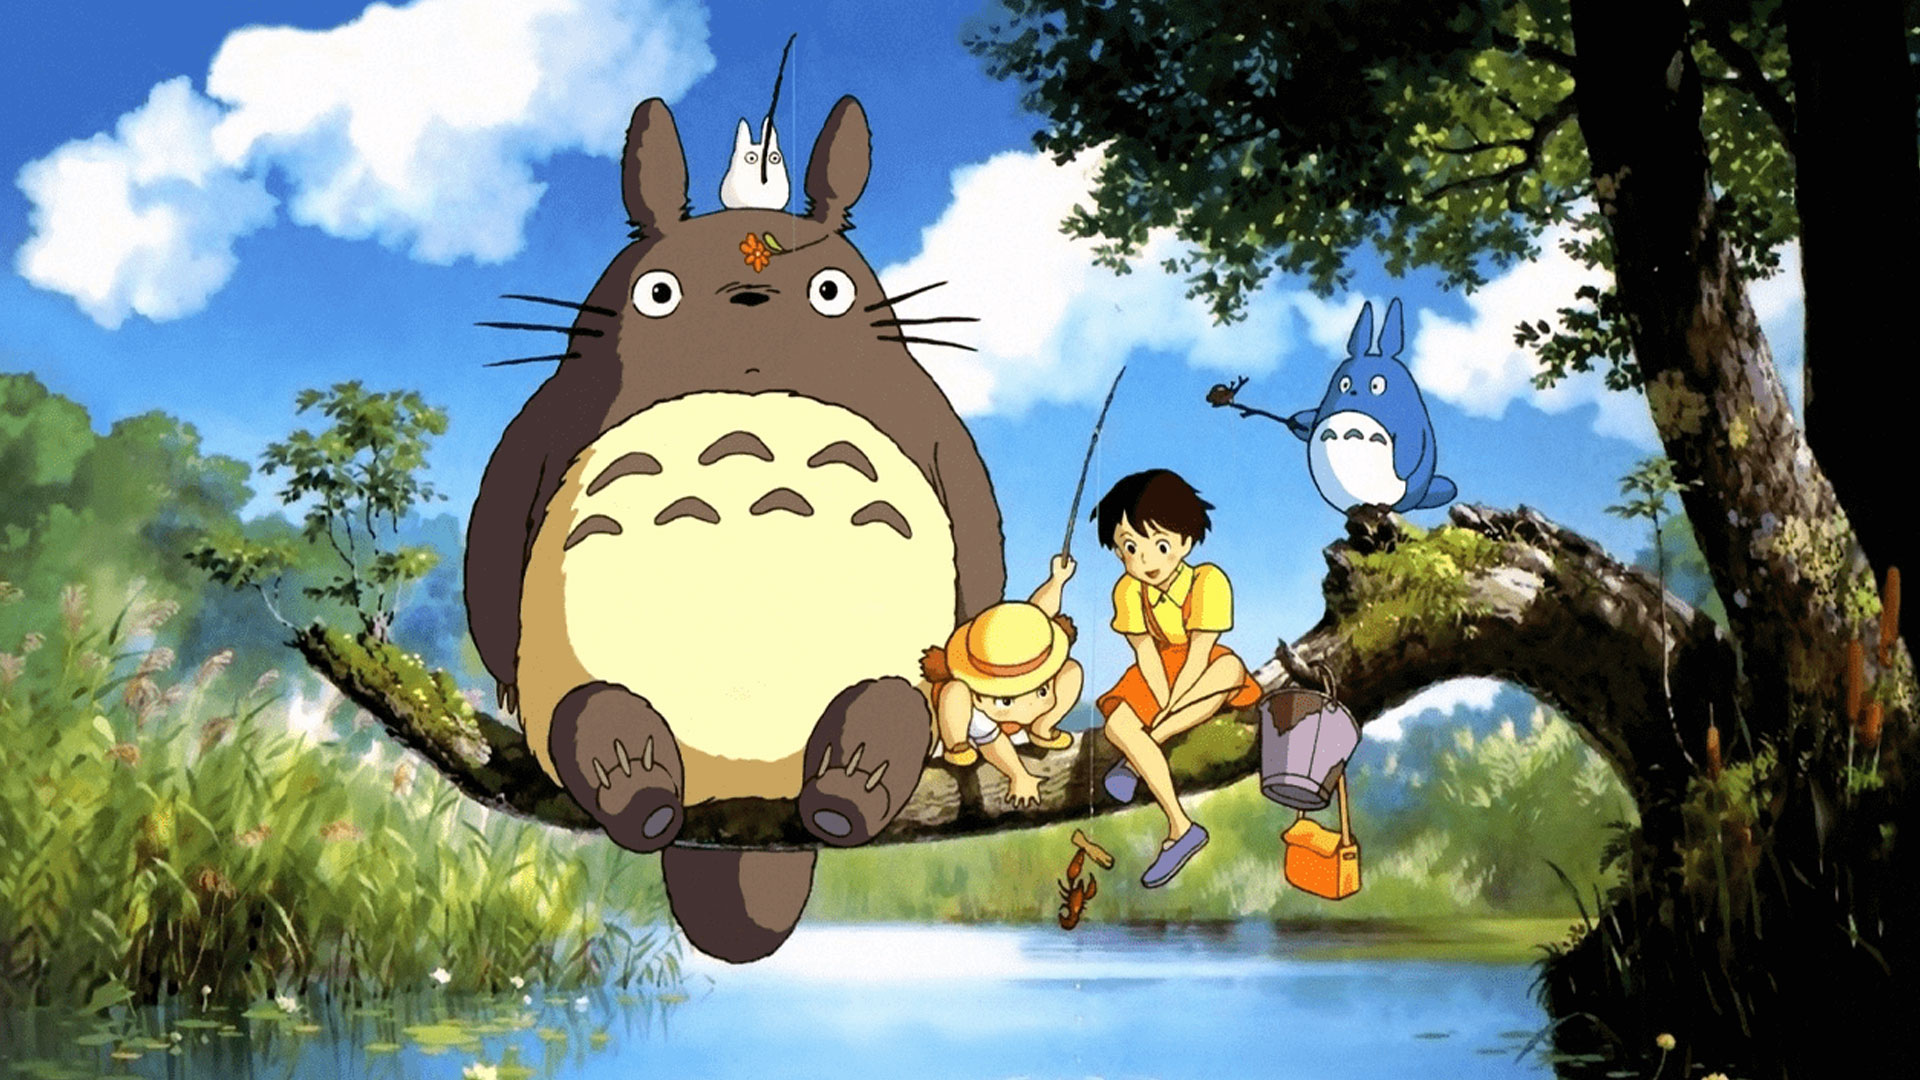 Not Just Cozy Vibes: Ghibli Movies Show Much More Than Just Aesthetic